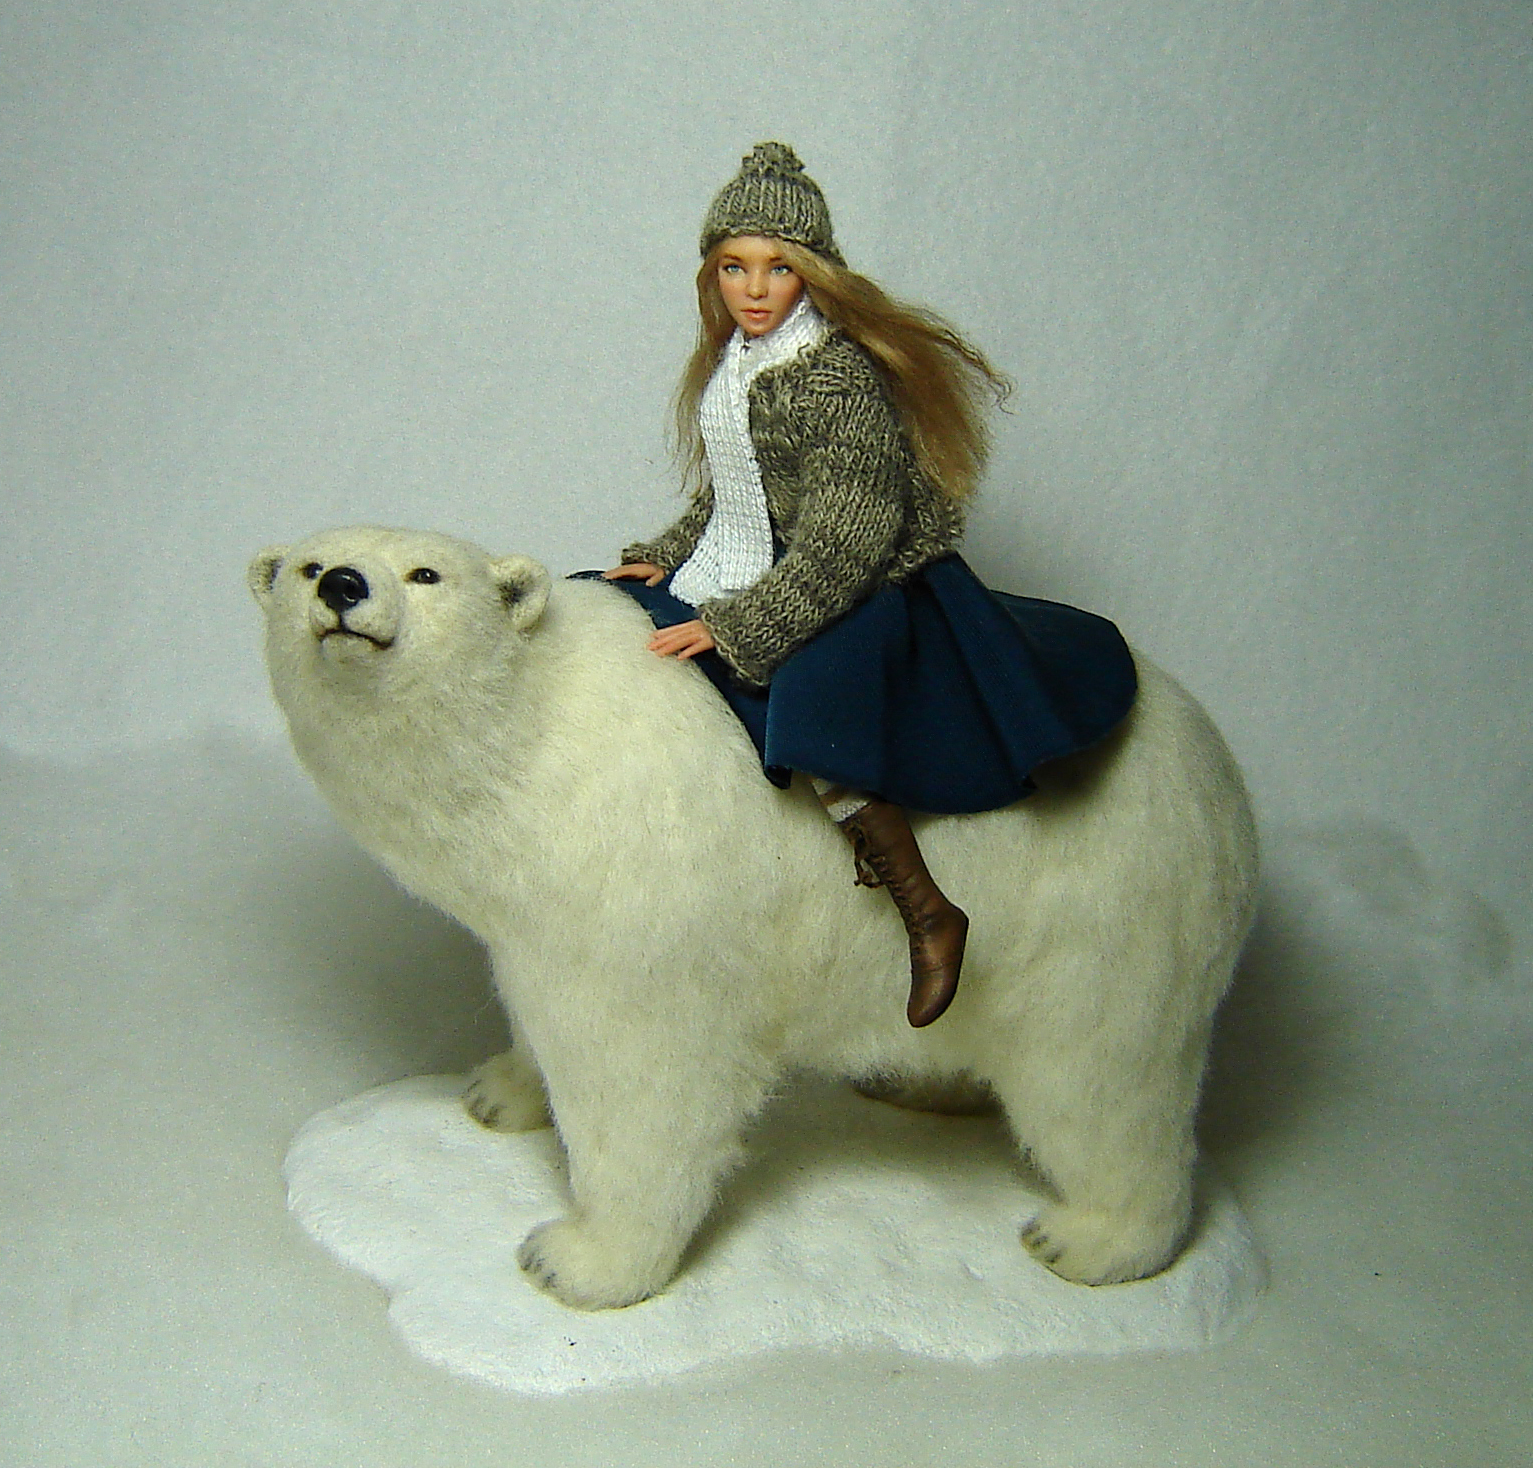 Ooak 1:12 scale girl doll sculpture & bear East of the sun west of the moon